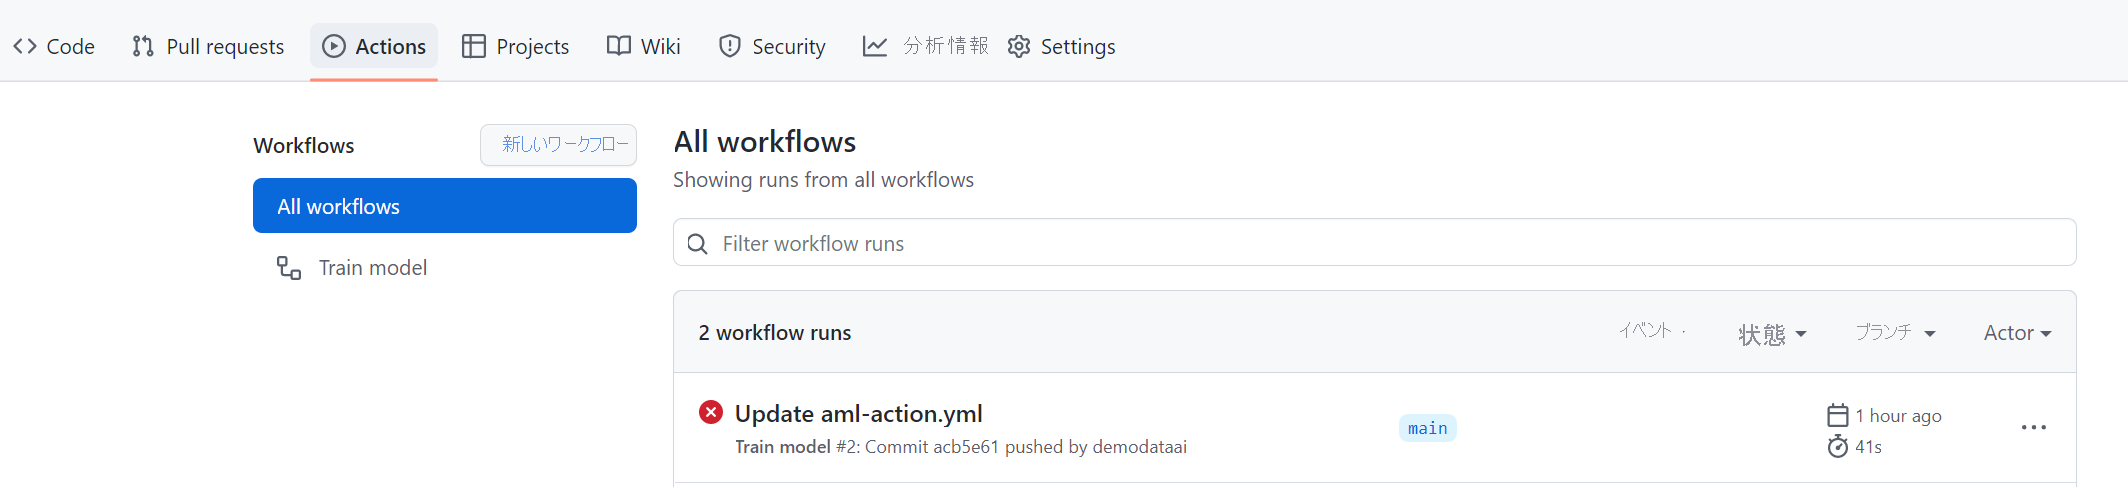 Screenshot of GitHub Actions overview.